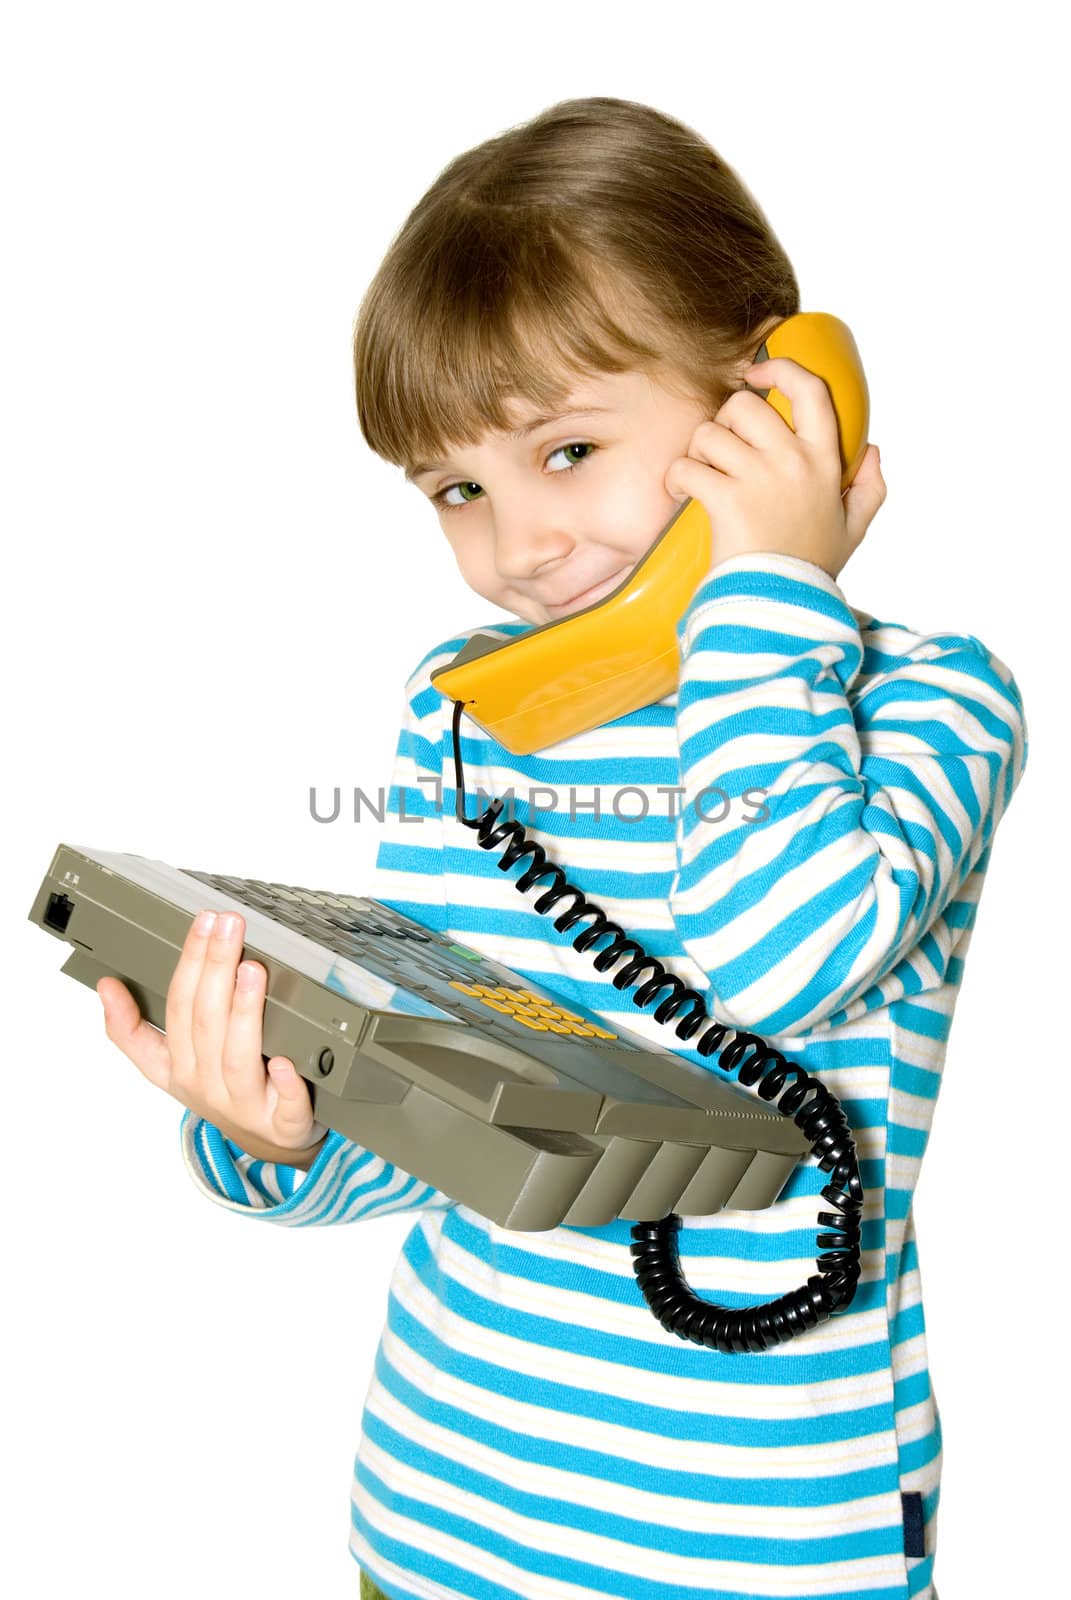 The girl speaks by phone with a yellow handset
